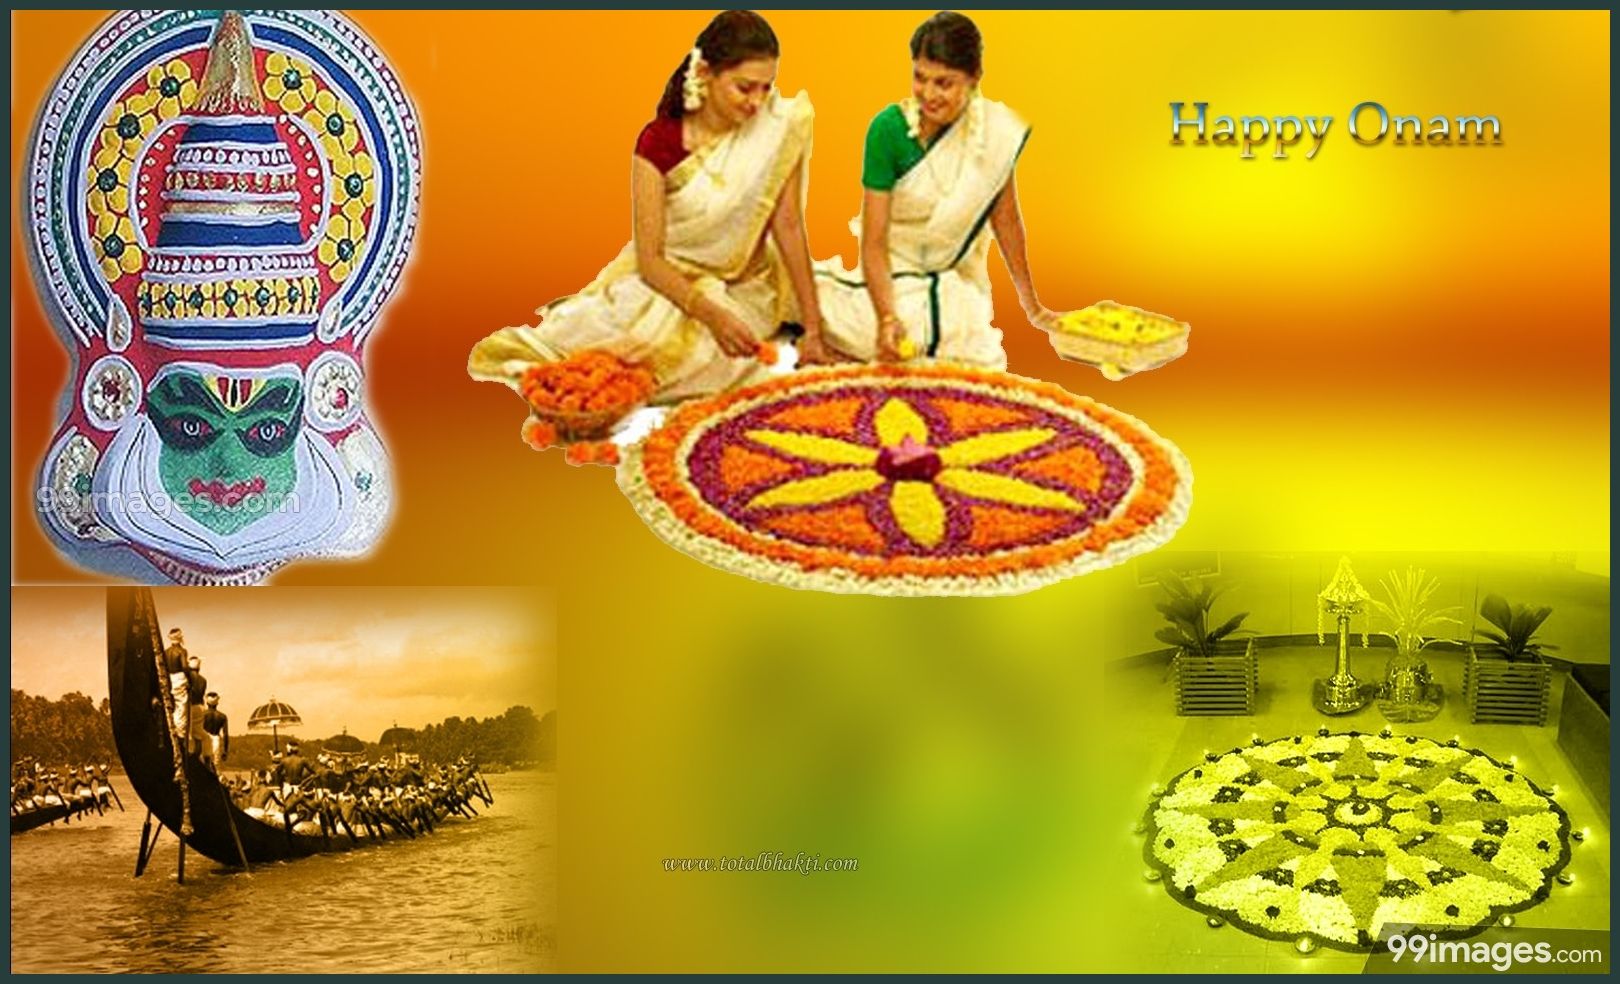 Onam Hd Wallpapers/images - Hd Images Of Celebrating Onam , HD Wallpaper & Backgrounds